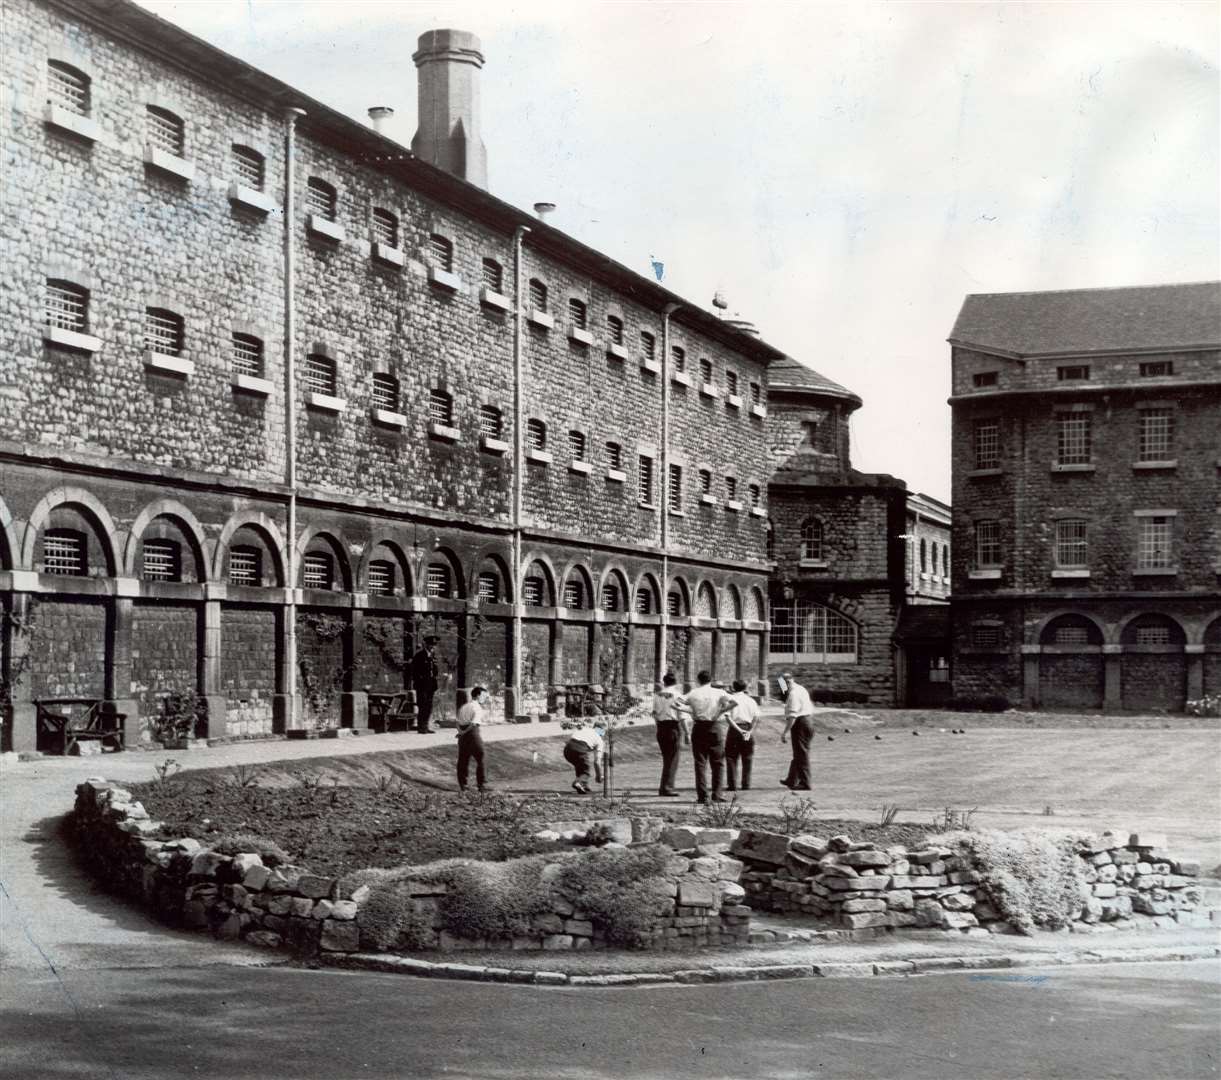 A photograph of Maidstone Prison taken in 1964